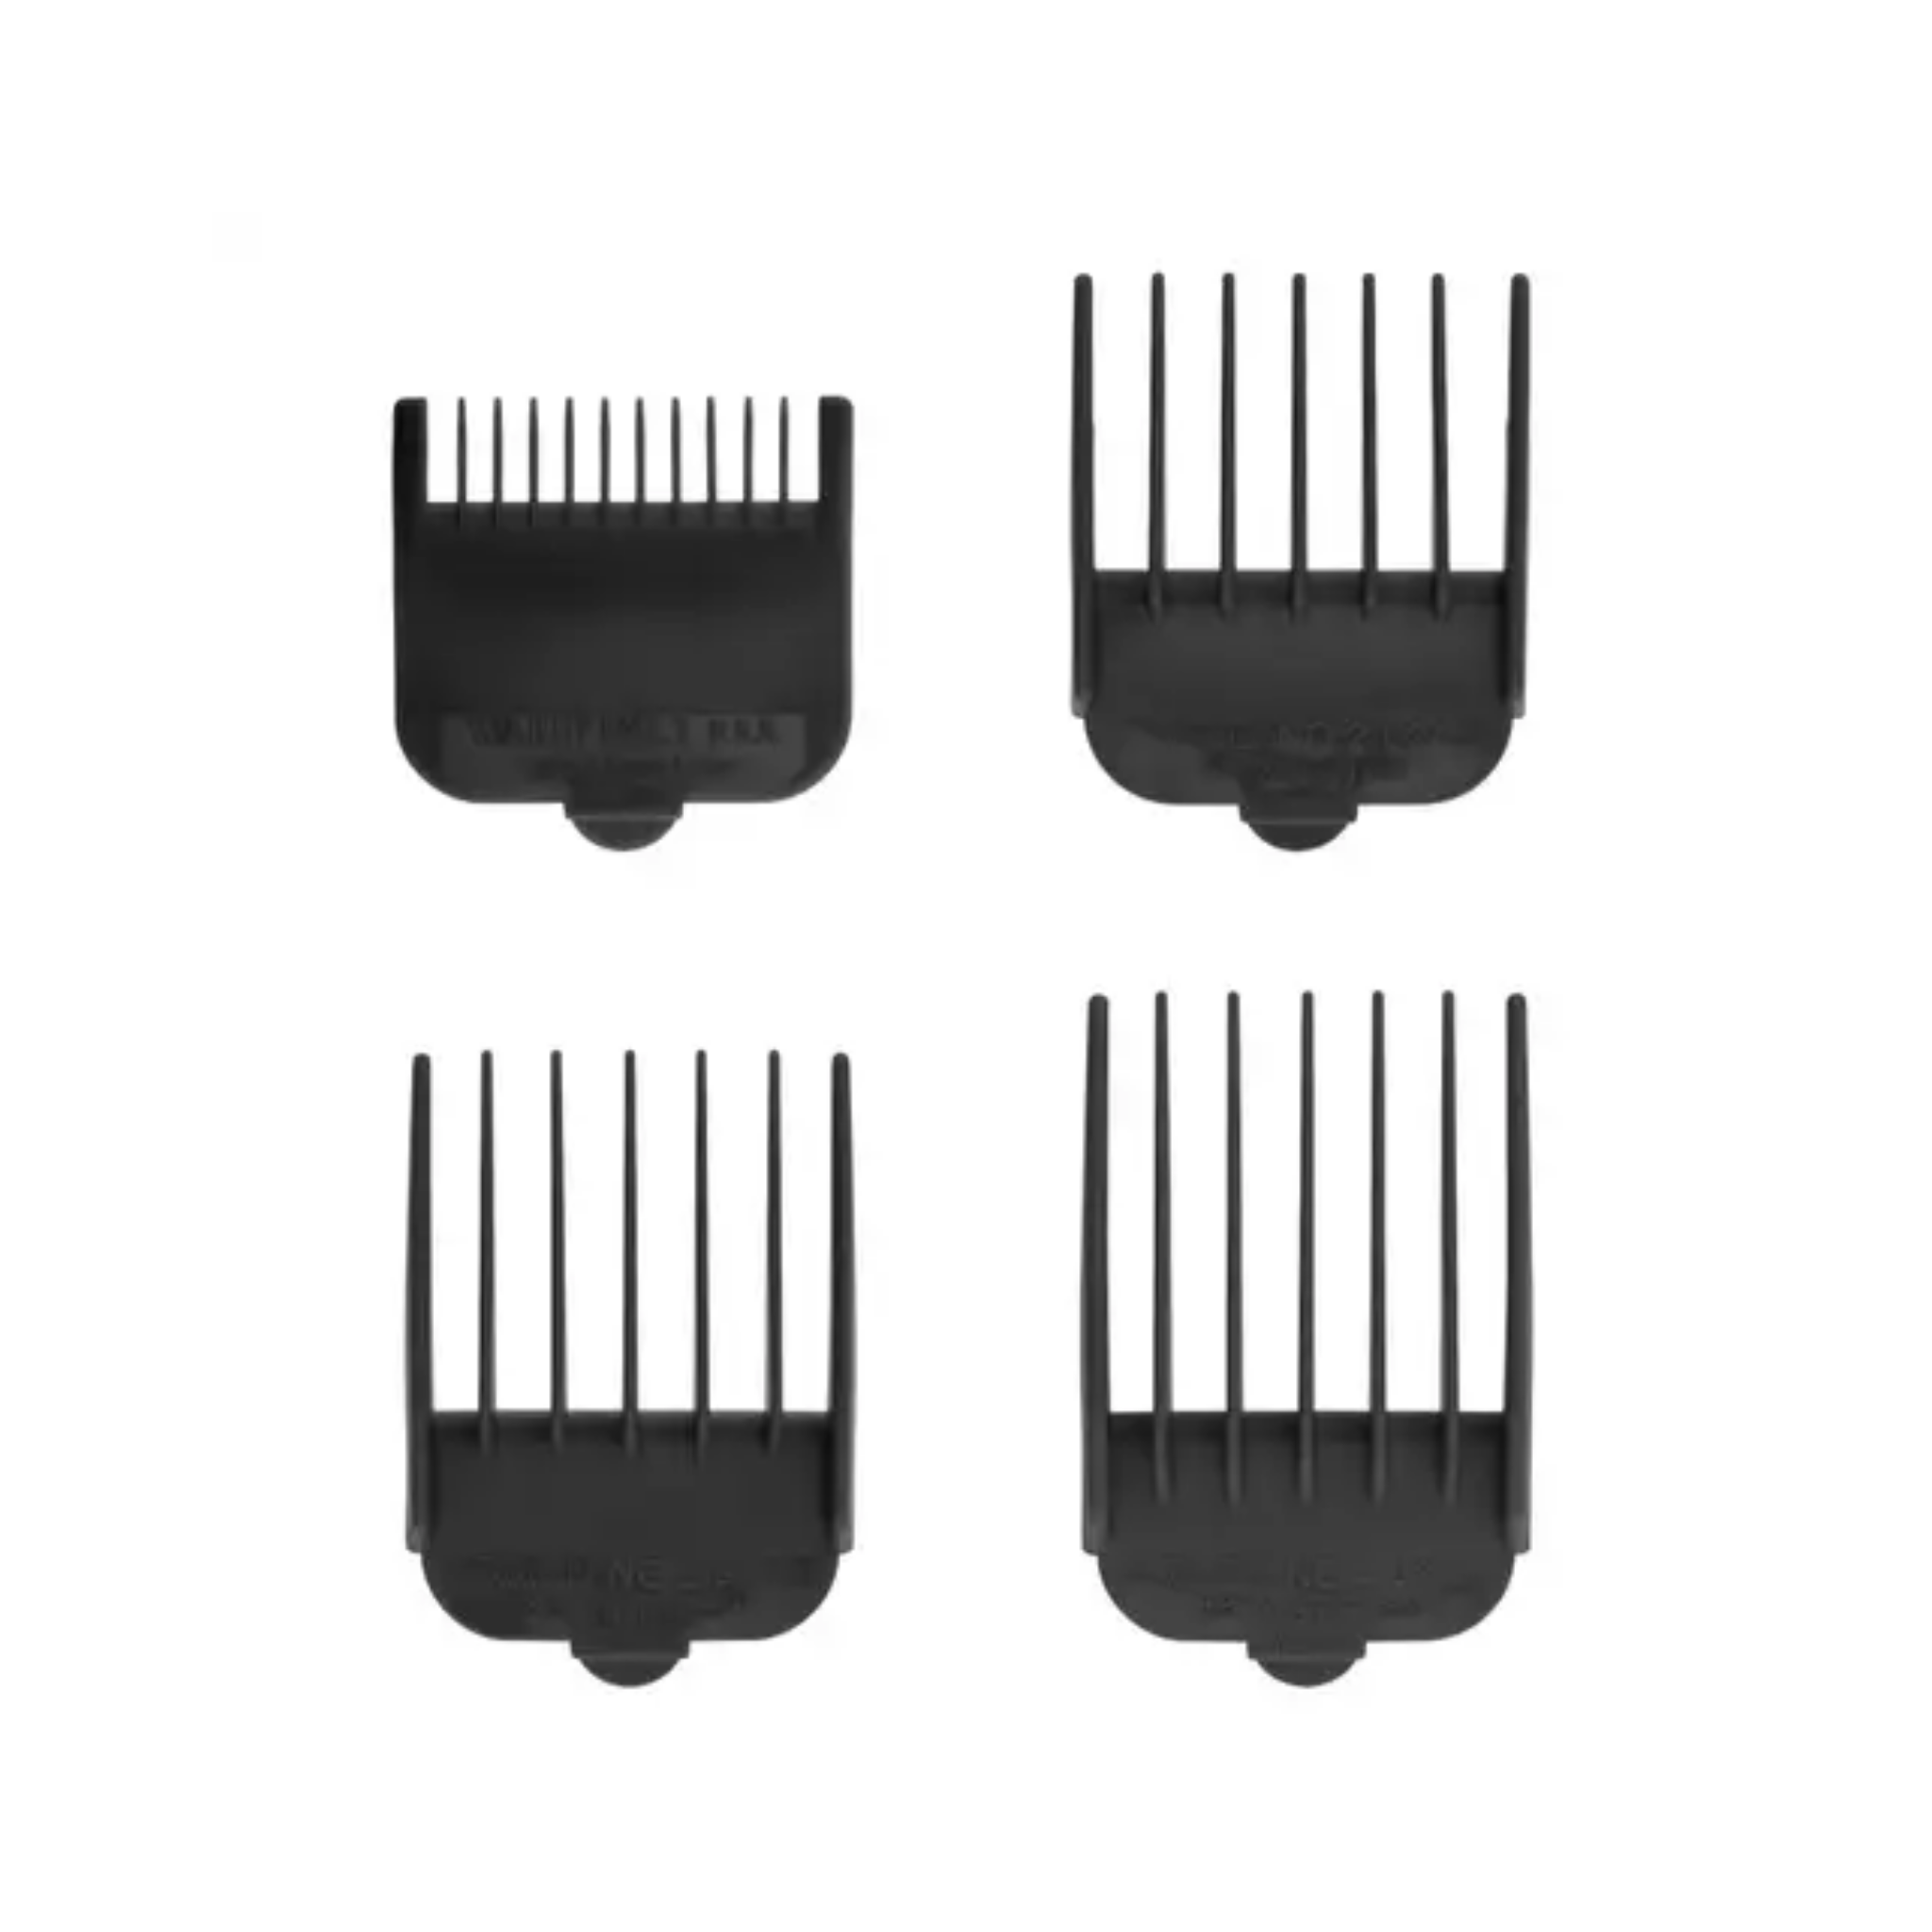 Blistered Cutting Guides (1-4 - Black)